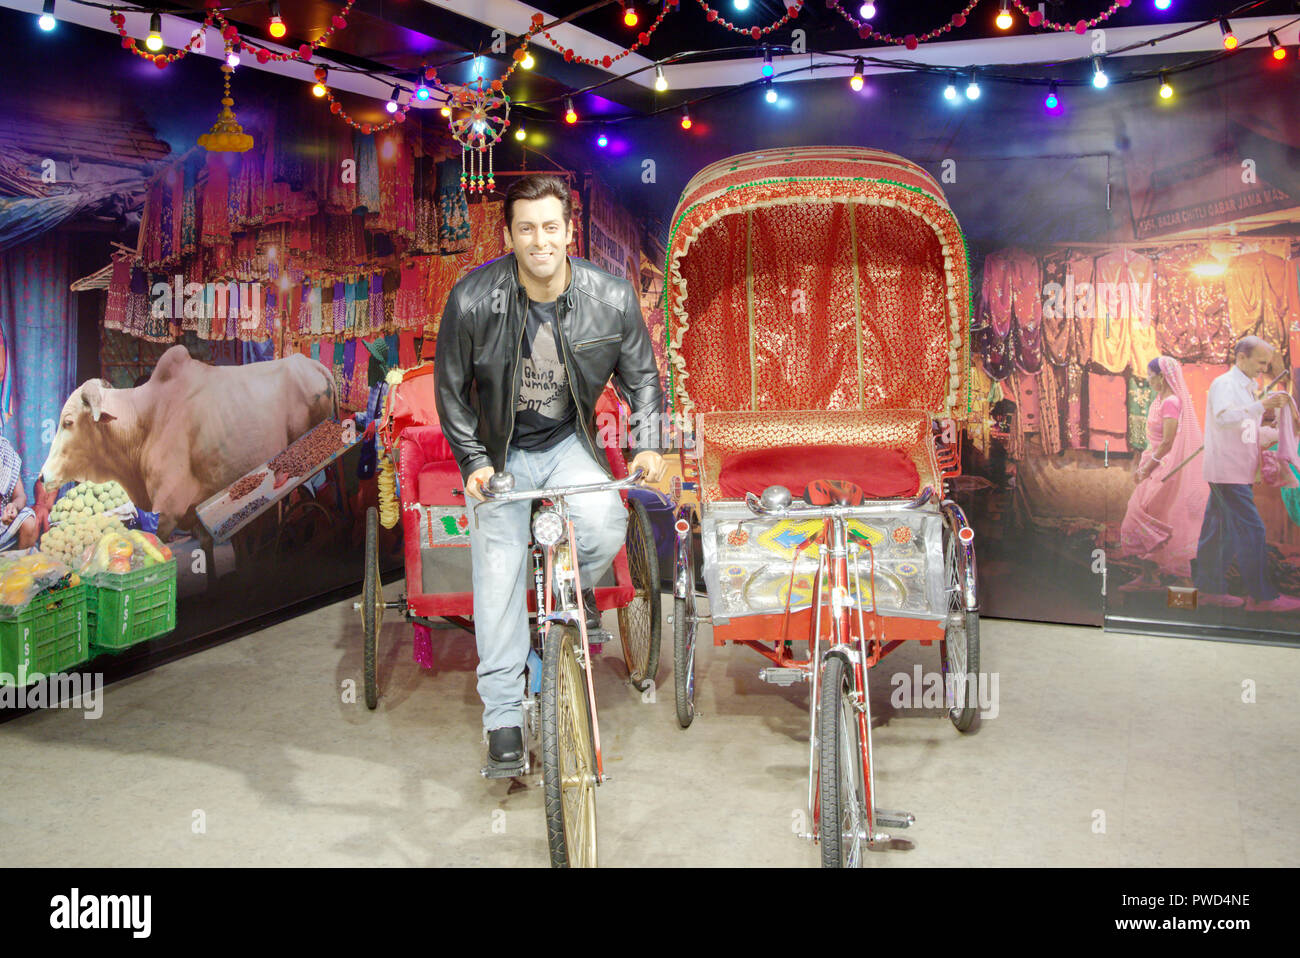 Wax figure of Indian Bollywood actor Salman Khan at Madame Tussauds museum, Delhi Stock Photo